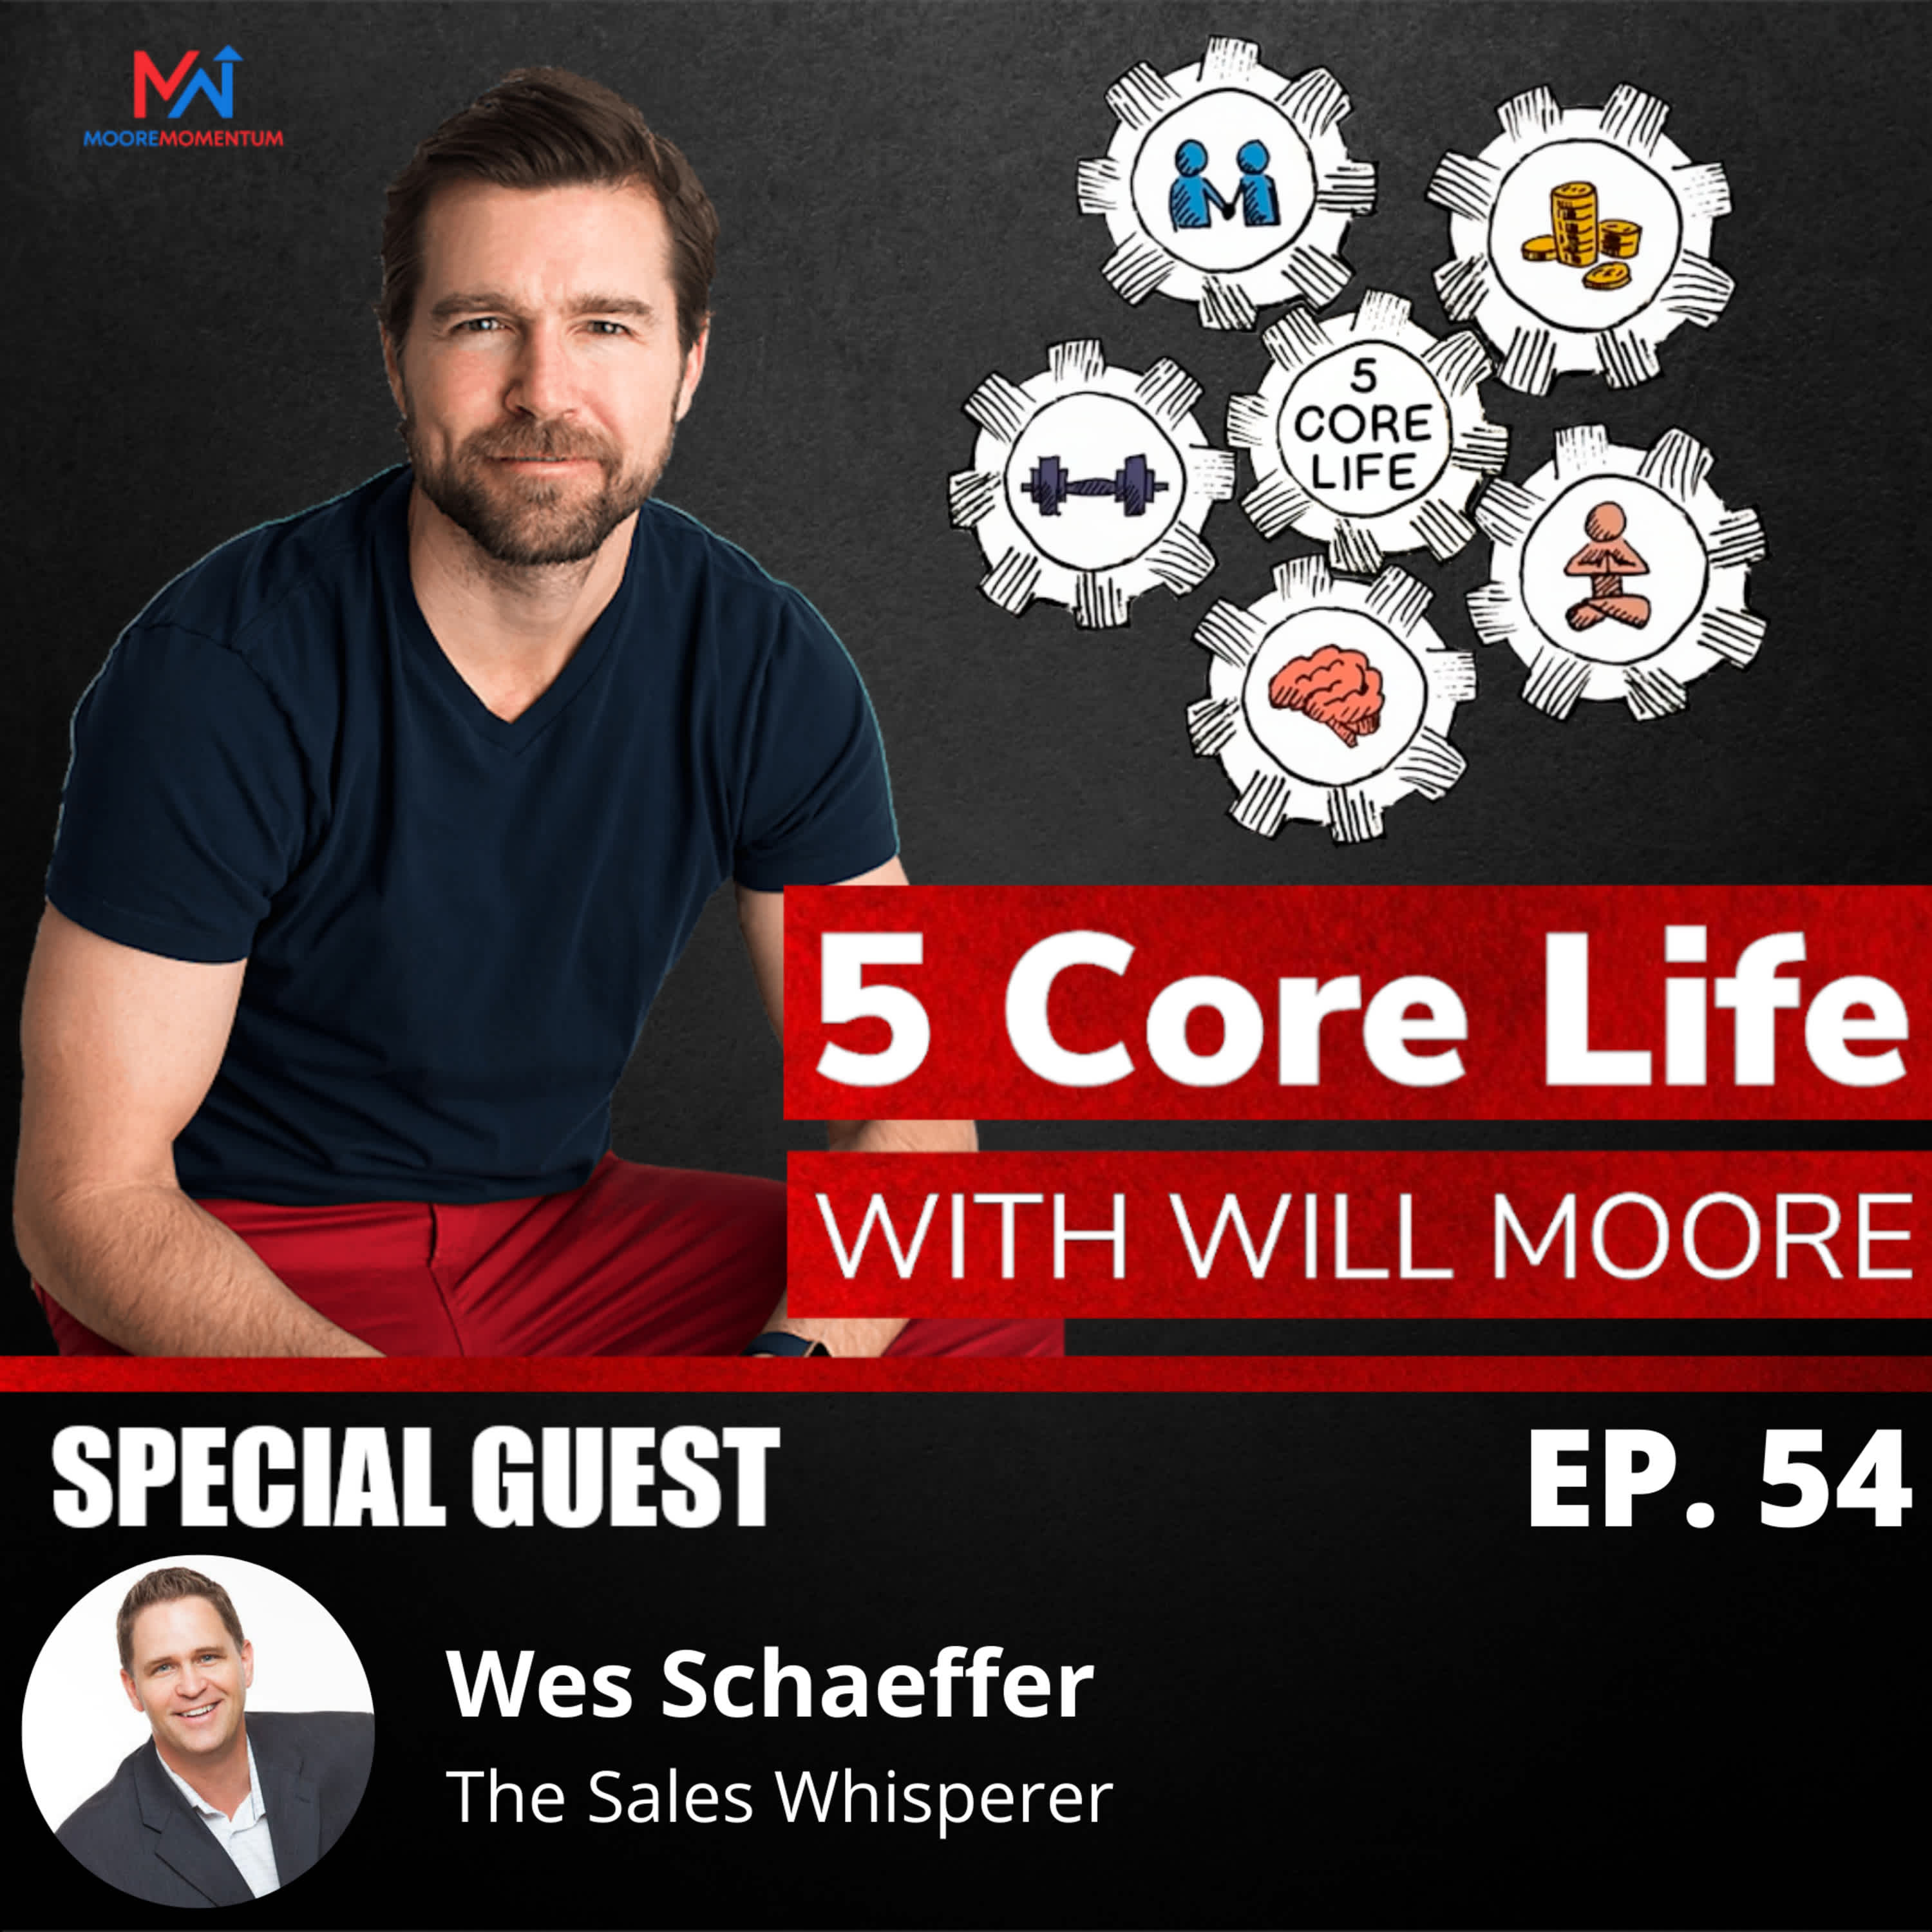 Give Others What They Need, to Get What You Want | Wes Schaeffer, The Sales Whisperer
